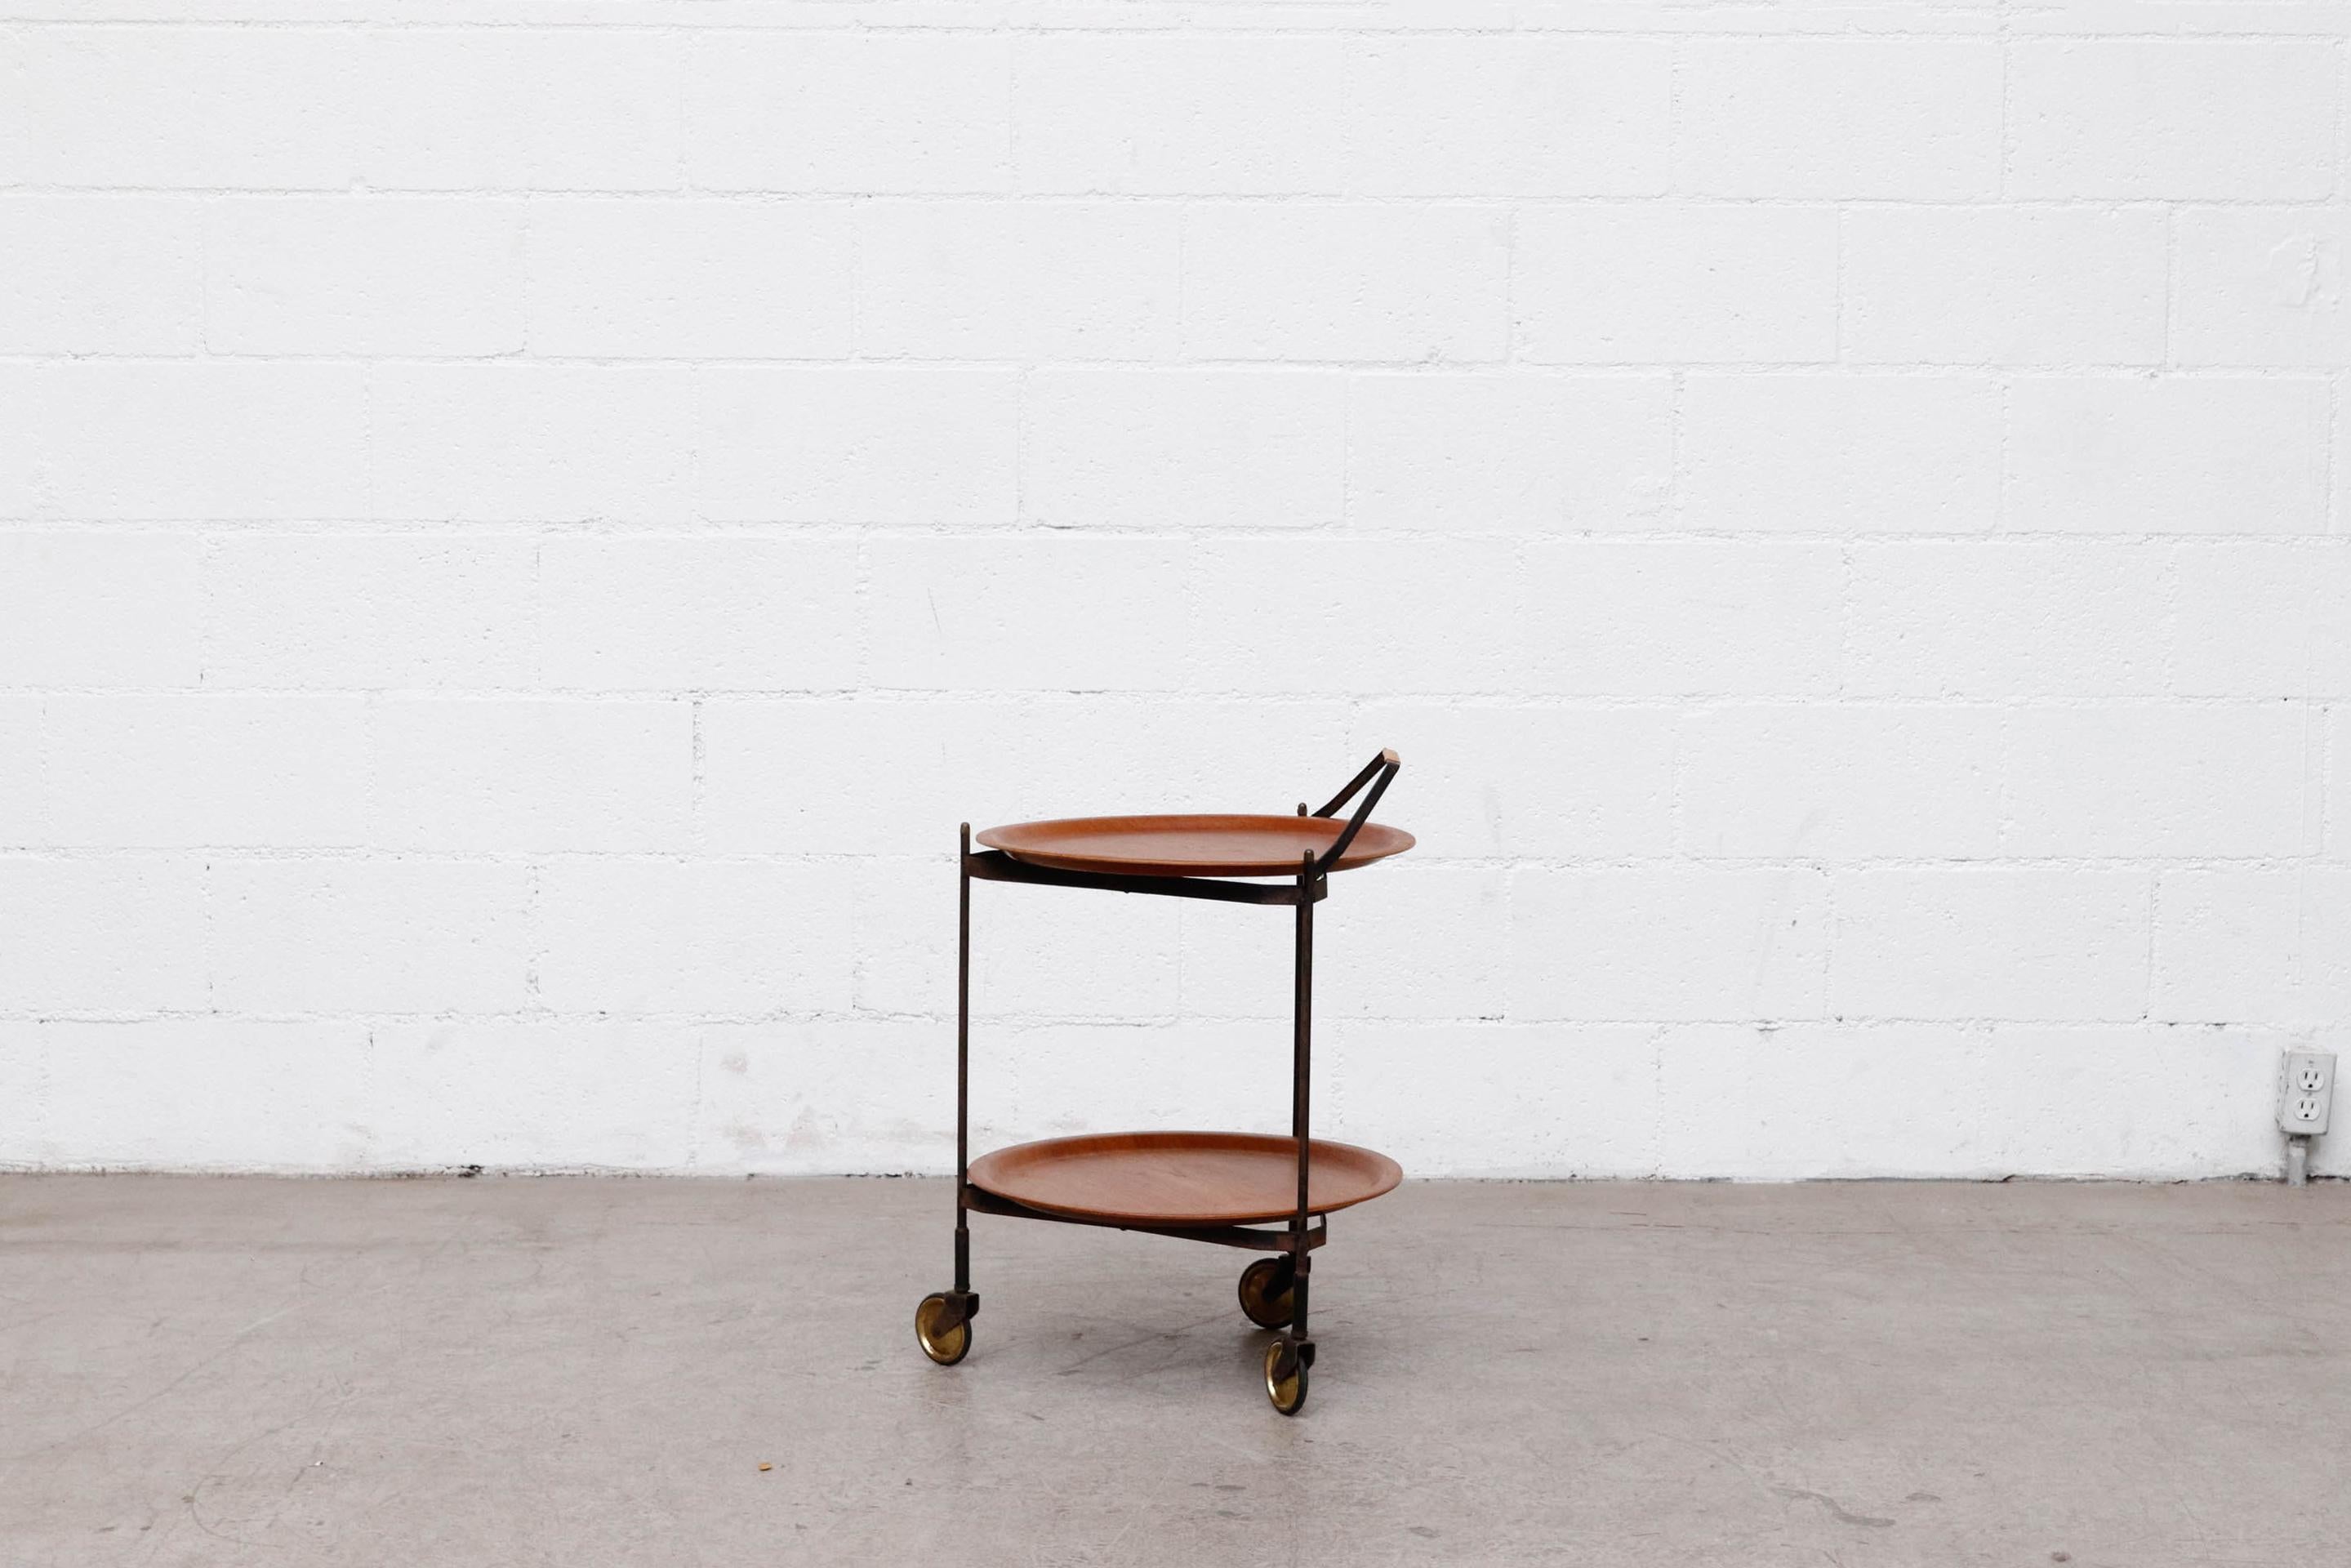 Awesome mid-century rolling cart with removable teak trays on folding black enameled metal frame with wheels and faux leather wrapped handle. Frame folds flat, trays can be removed. In original condition with lightly refinished trays and visible